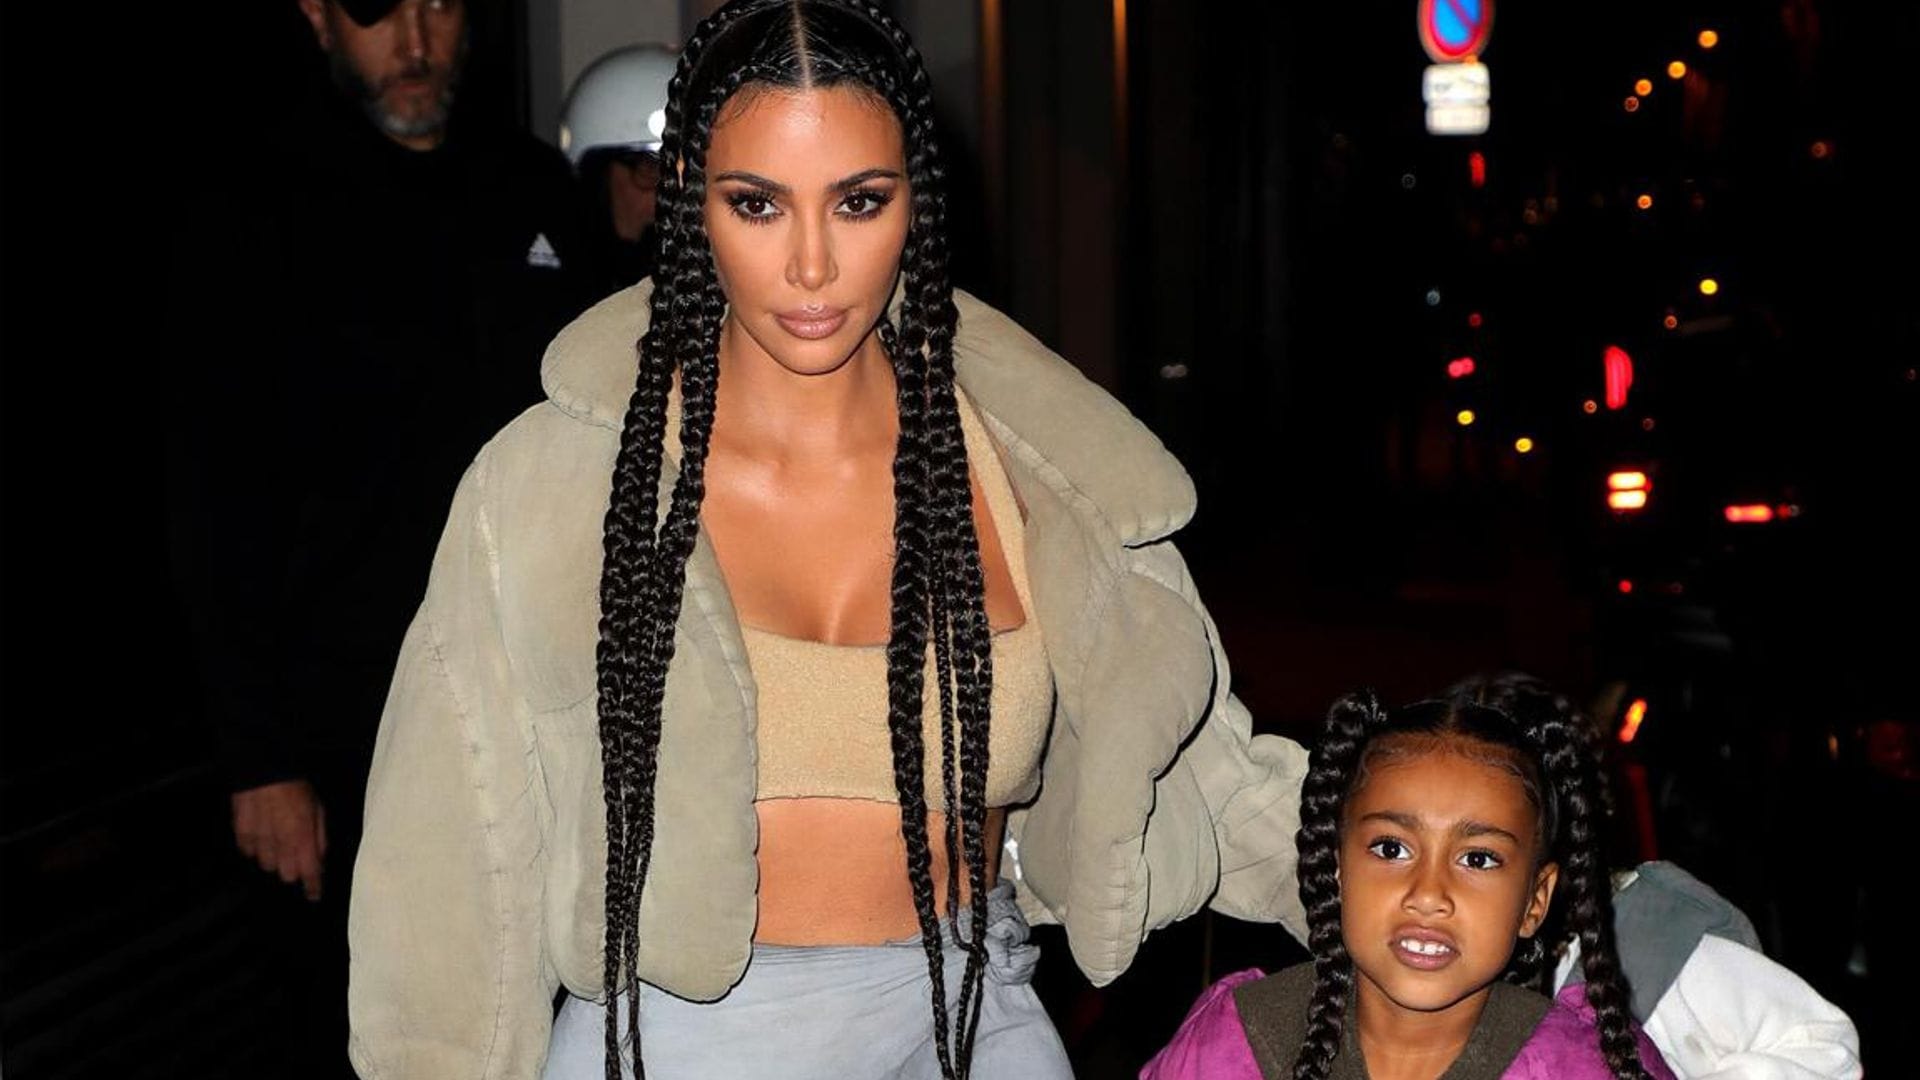 Kim Kardashian moved to tears by North West’s performance